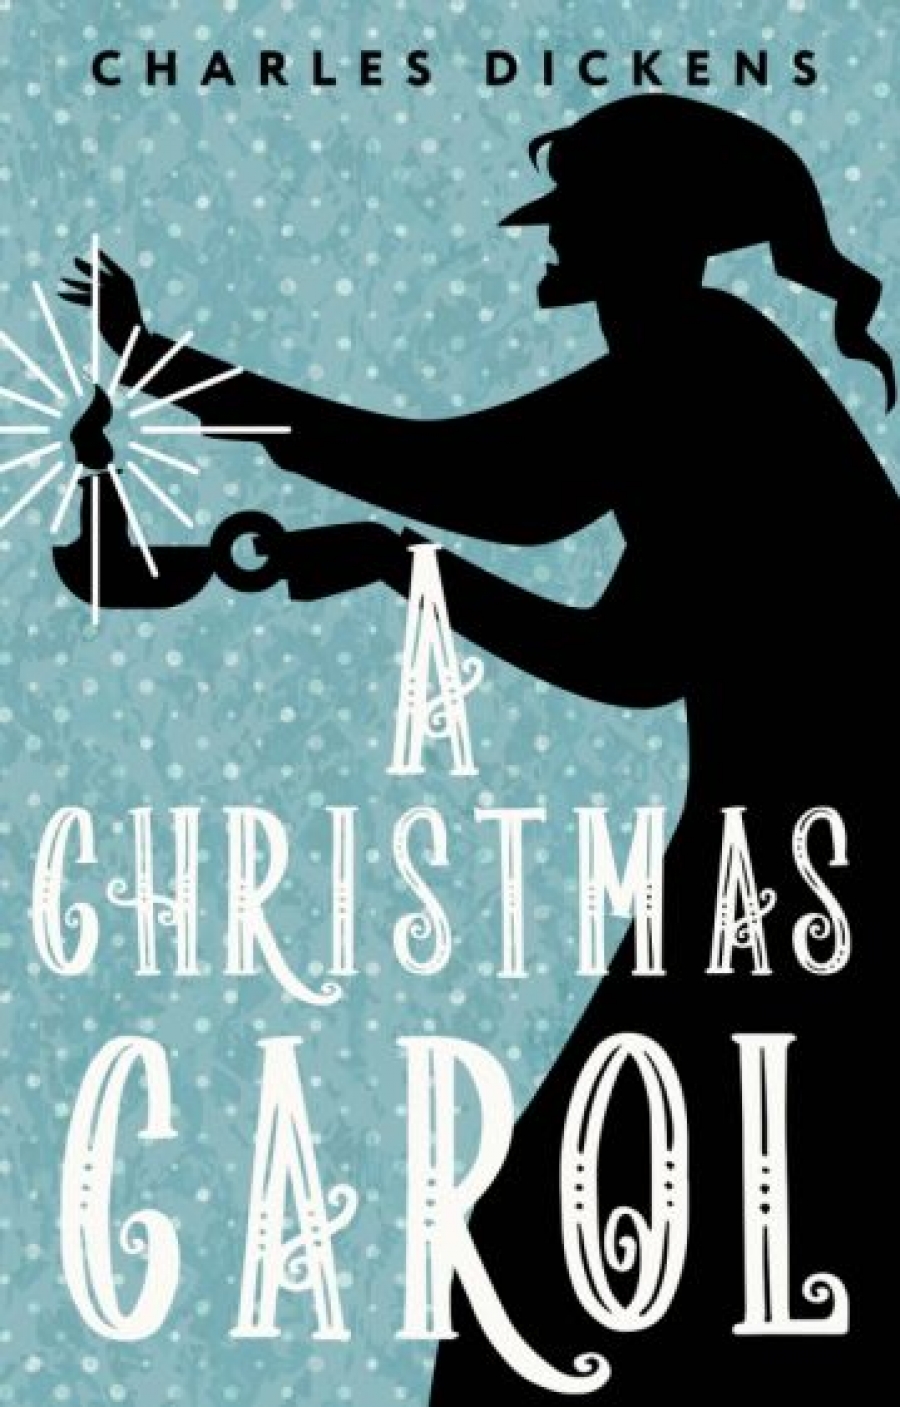 Dickens Charles A Christmas Carol. In Prose. Being a Ghost Story 